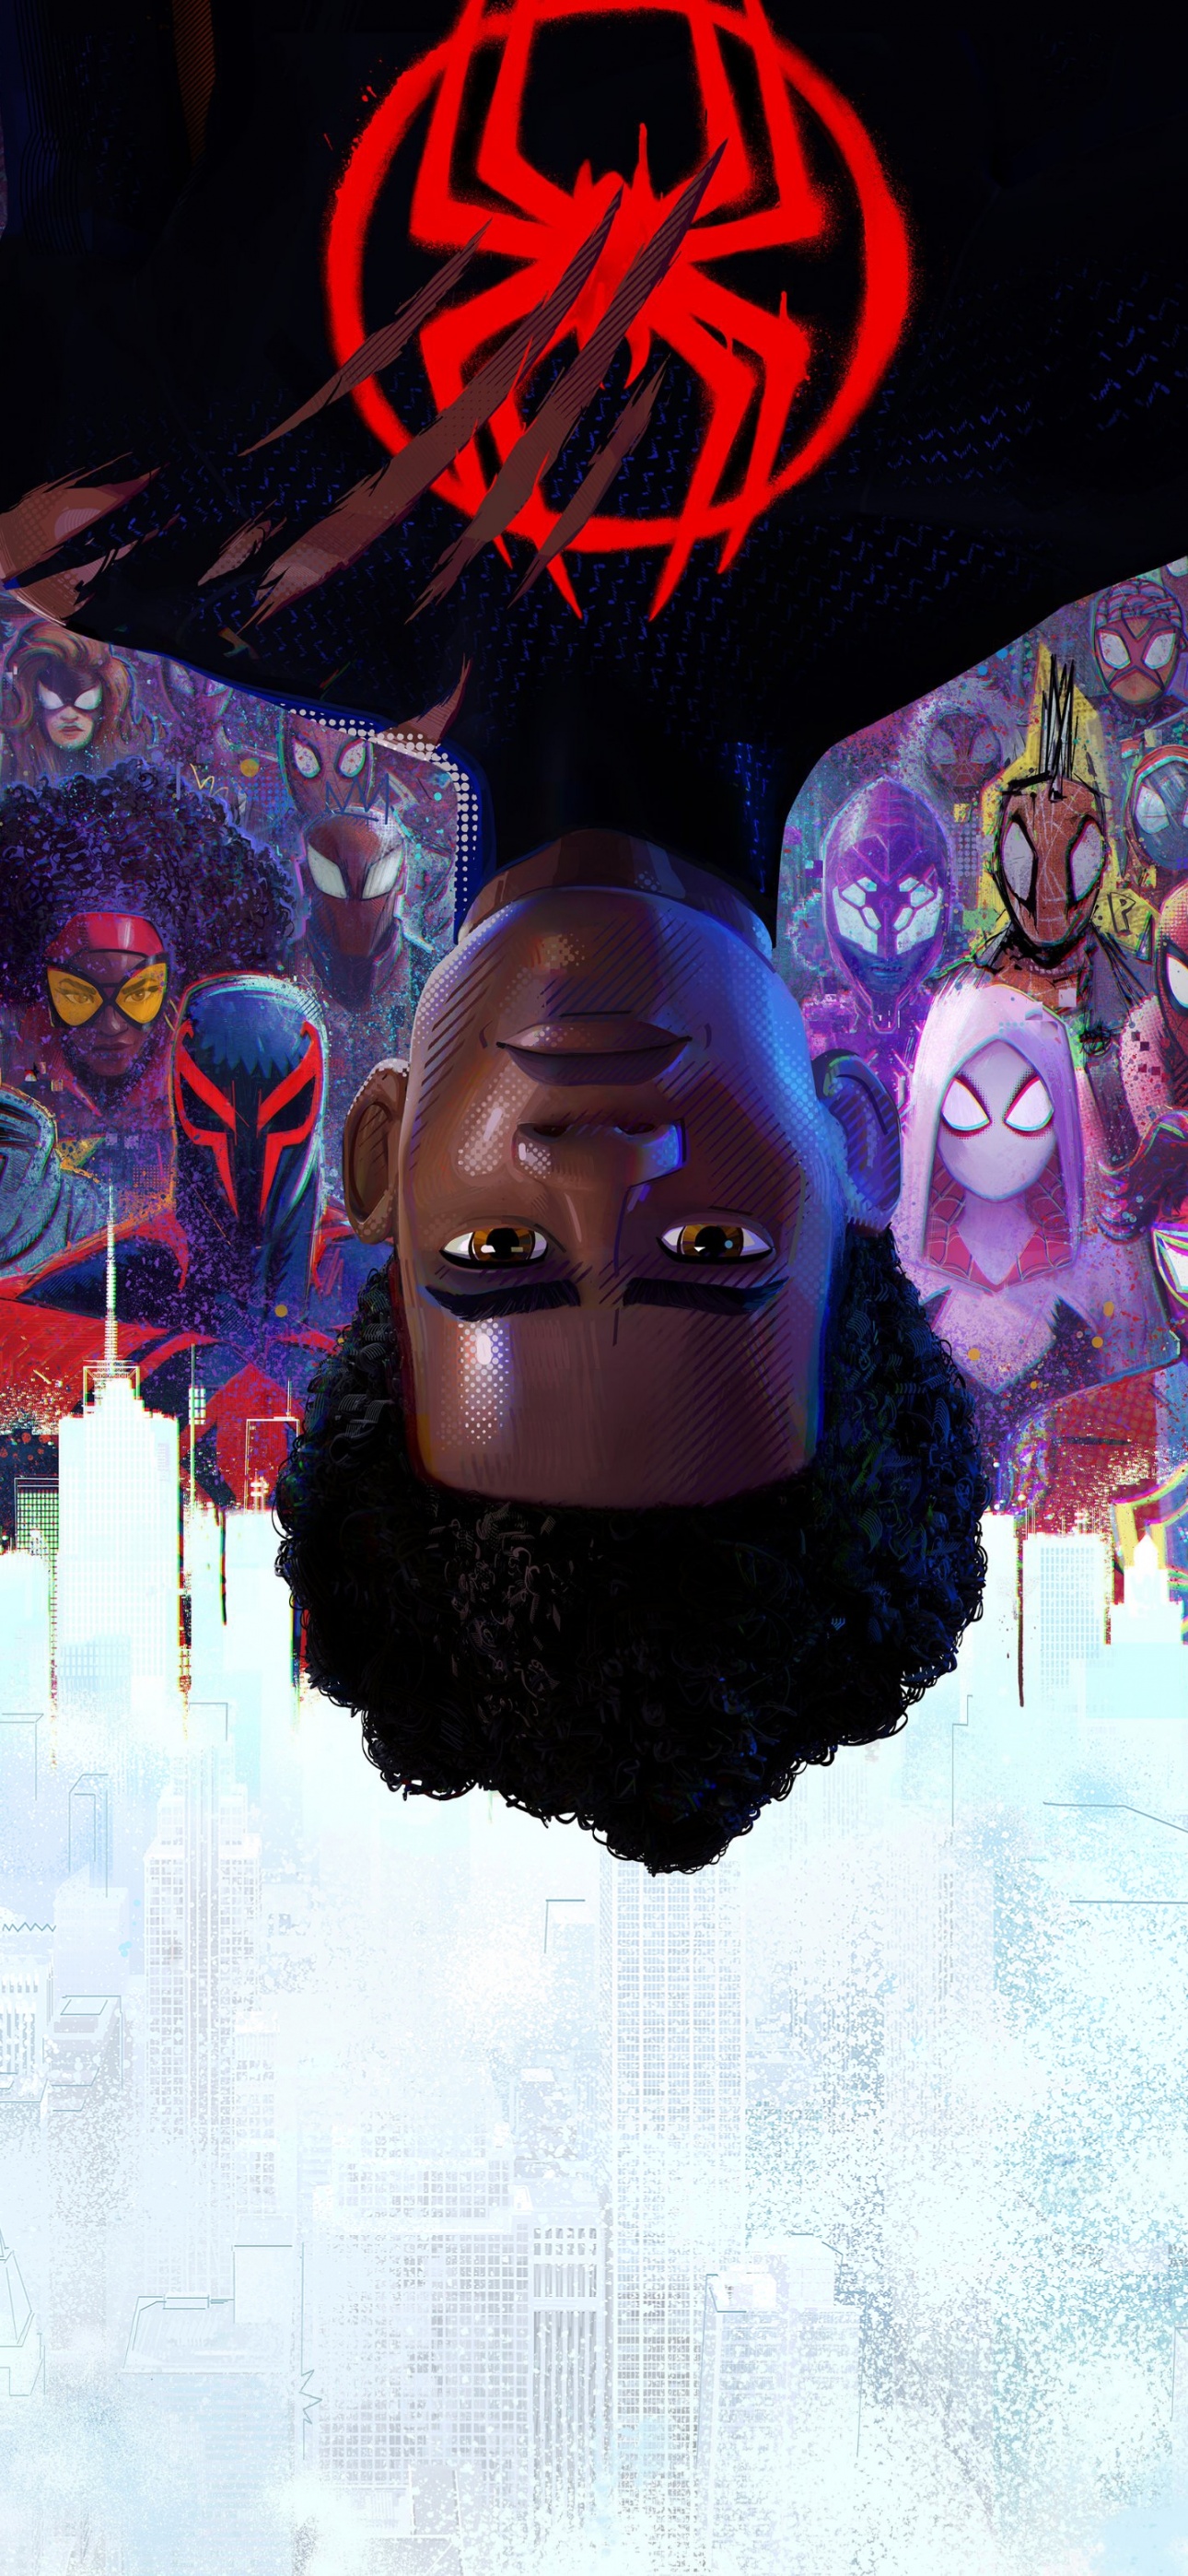 Converted this iconic image to mobile wallpaper from across the Spiderverse  : r/MobileWallpaper